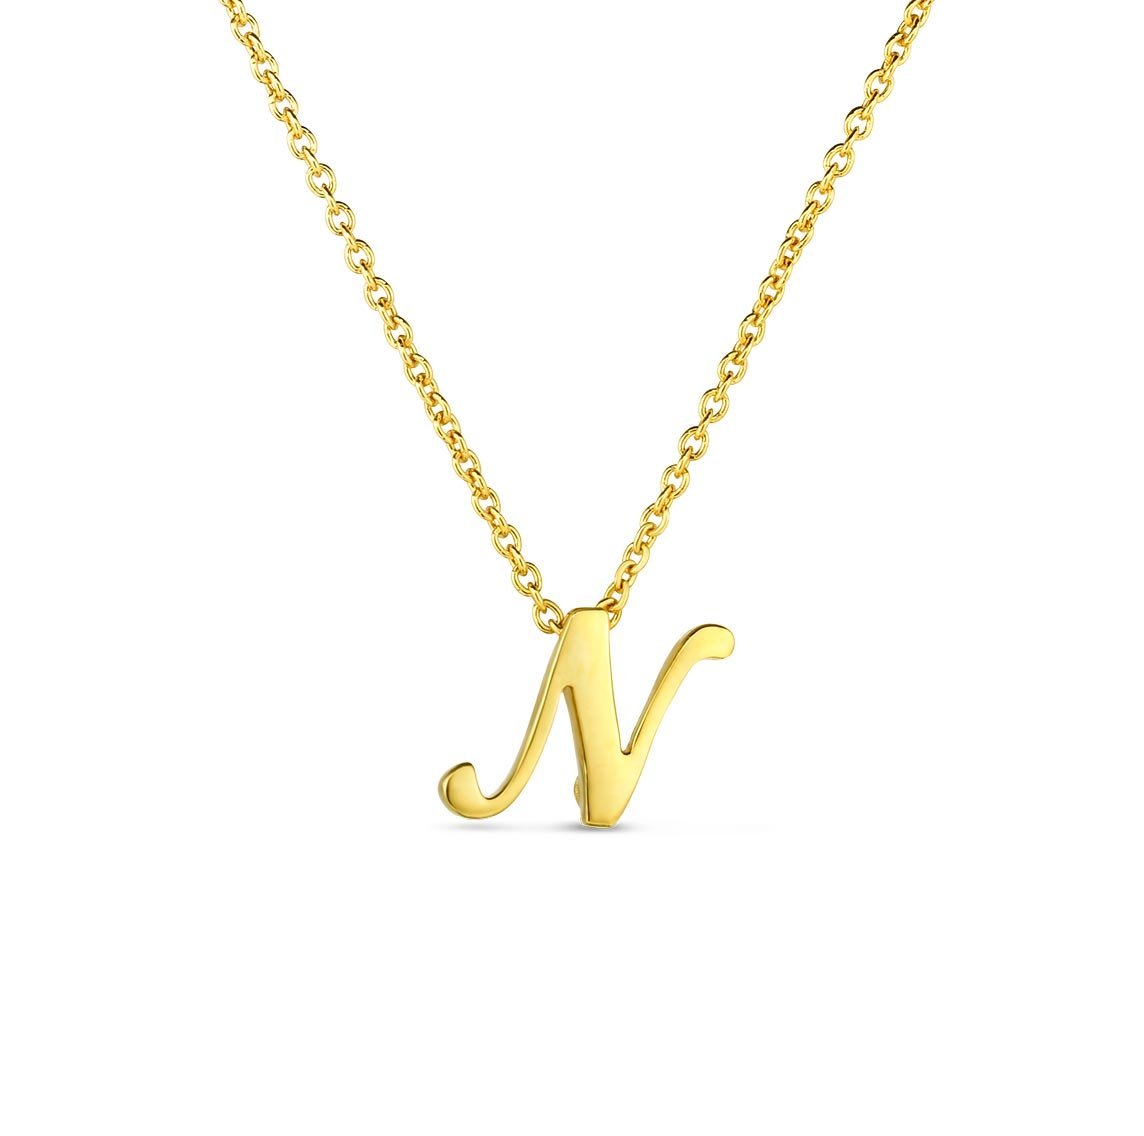 Roberto Coin "Tiny Treasures" Small Script Initial ‘N’ Pendant On Chain